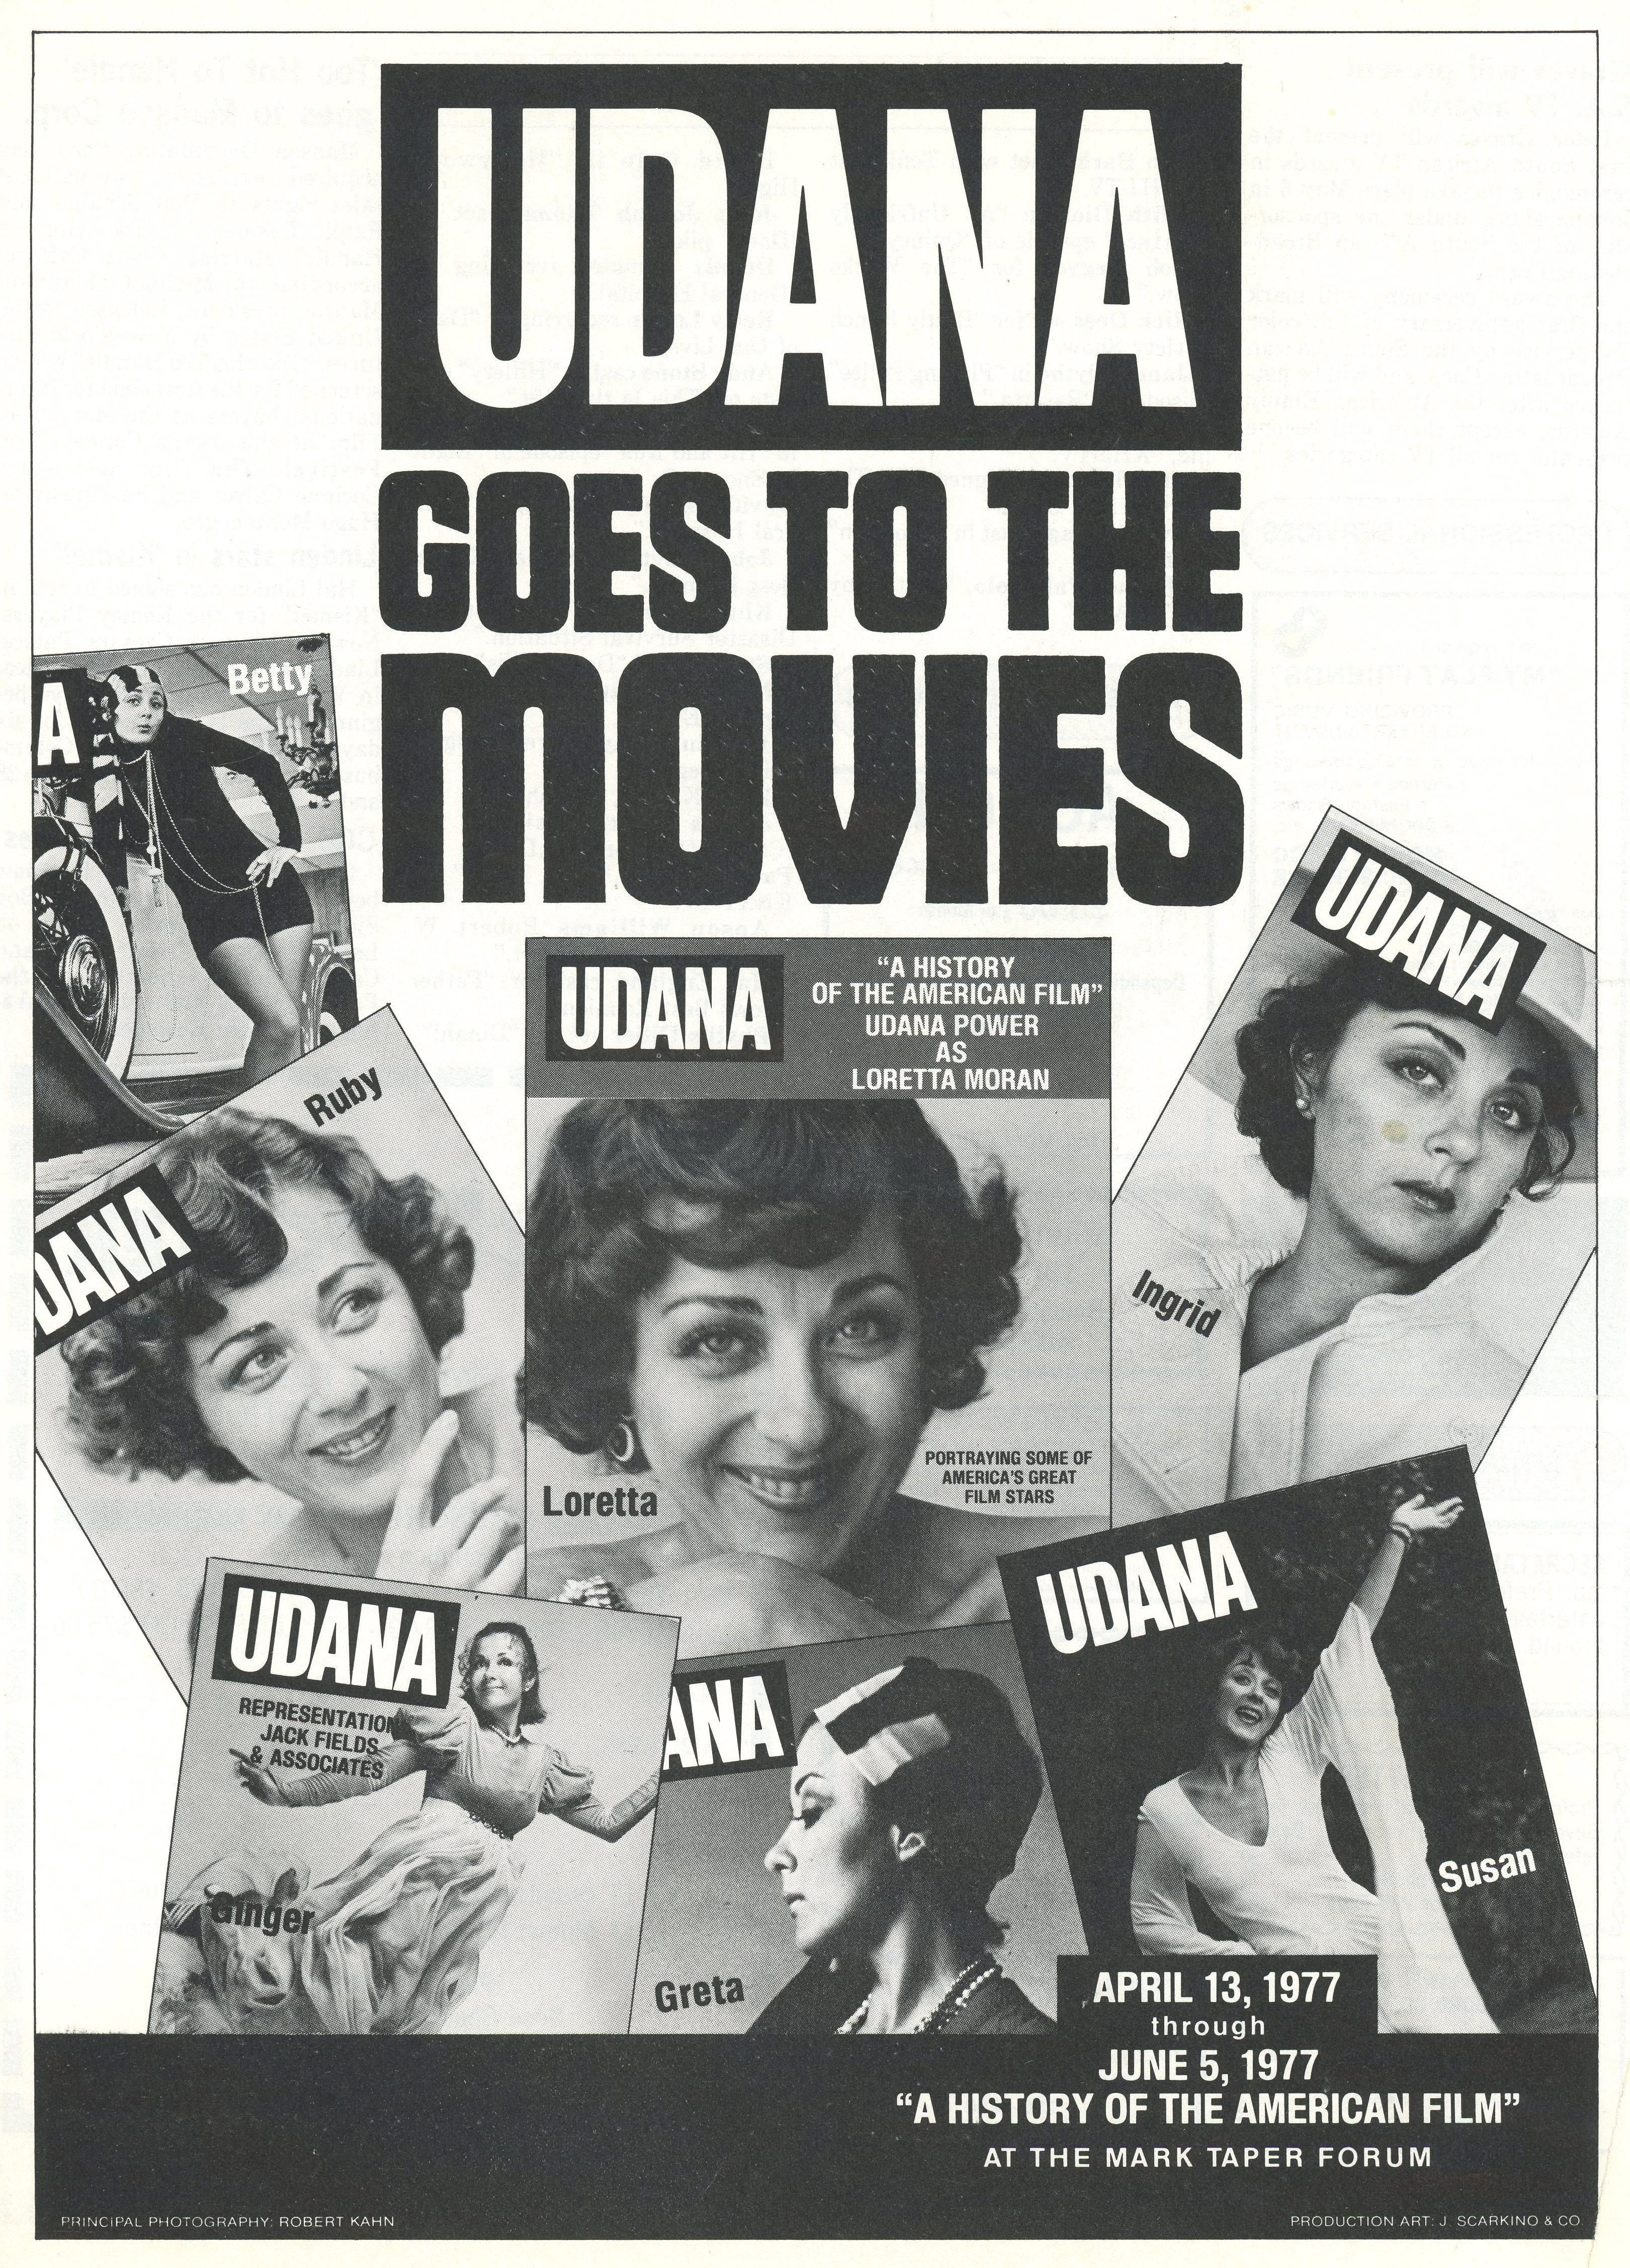 Udana co-starred in the 1977 production of A History of the American Film.